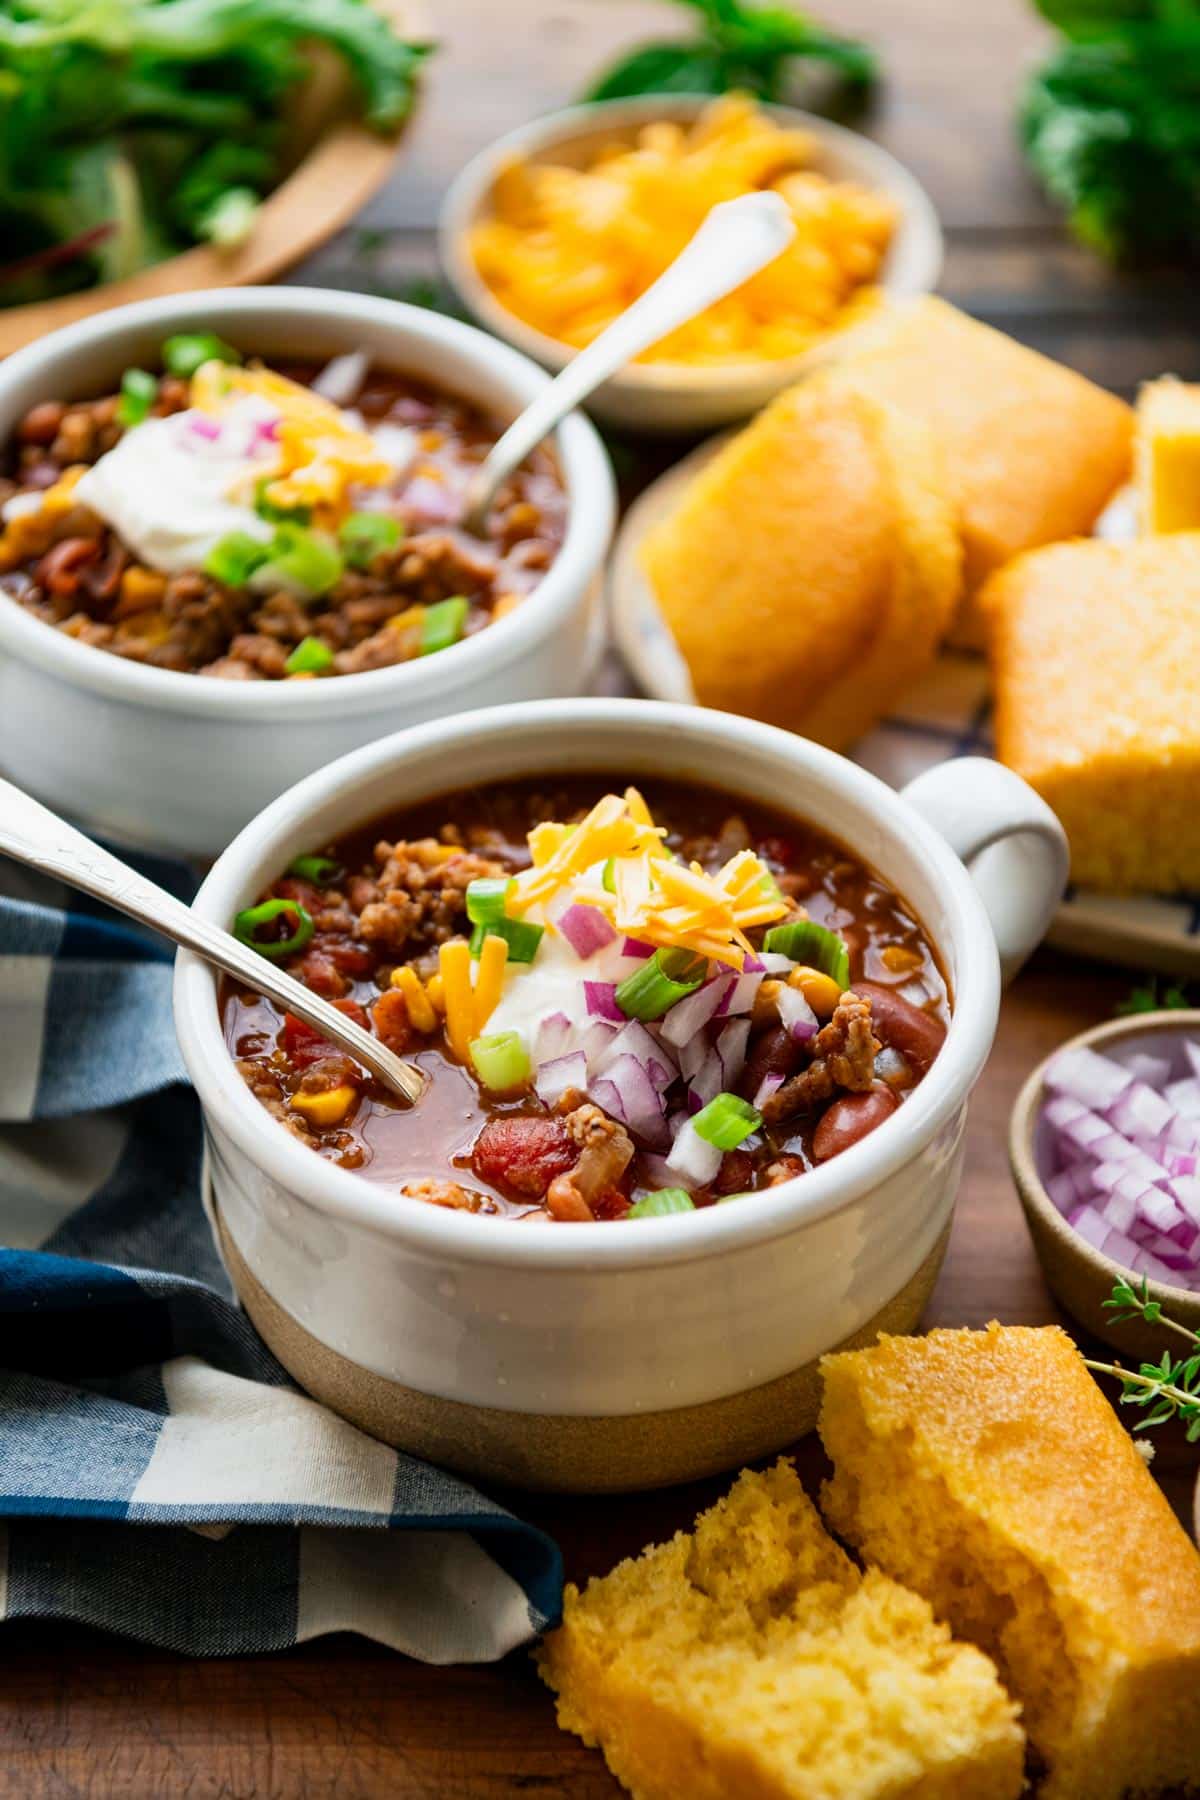 Cornbread and bowls of pork chili on a wooden table.